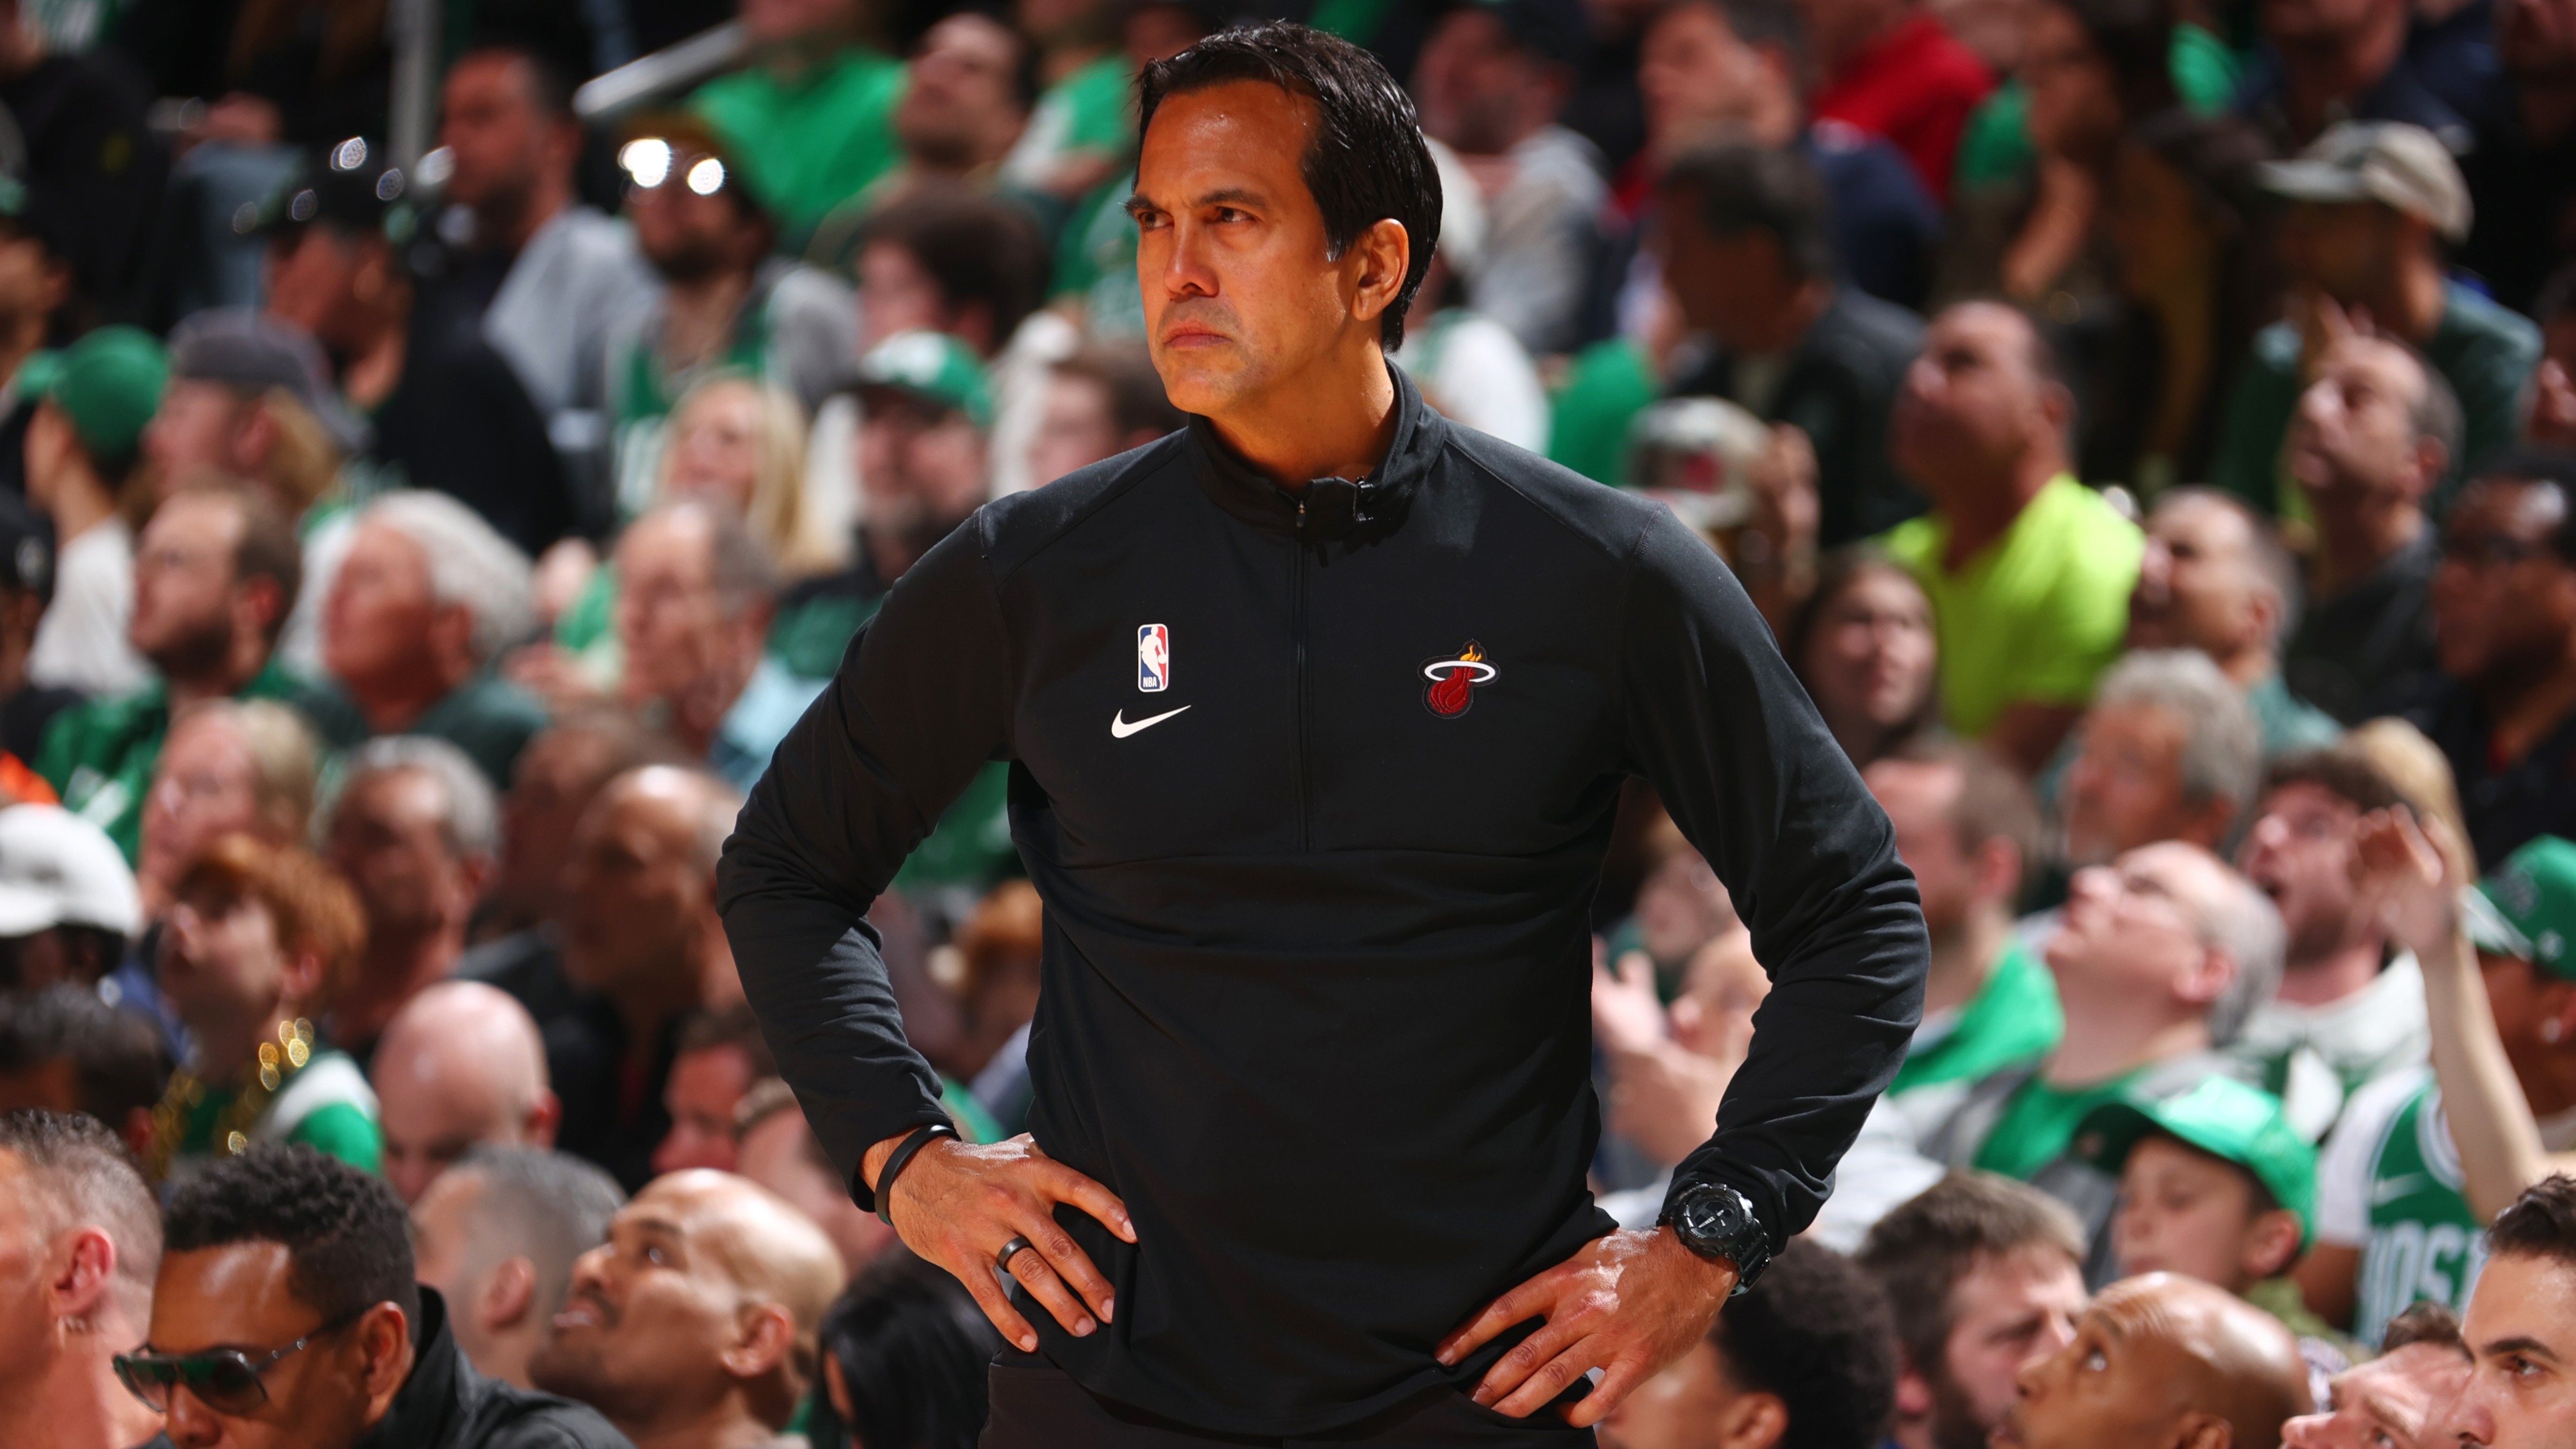 Miami Heat assistant coach Chris Quinn is being eyed by the